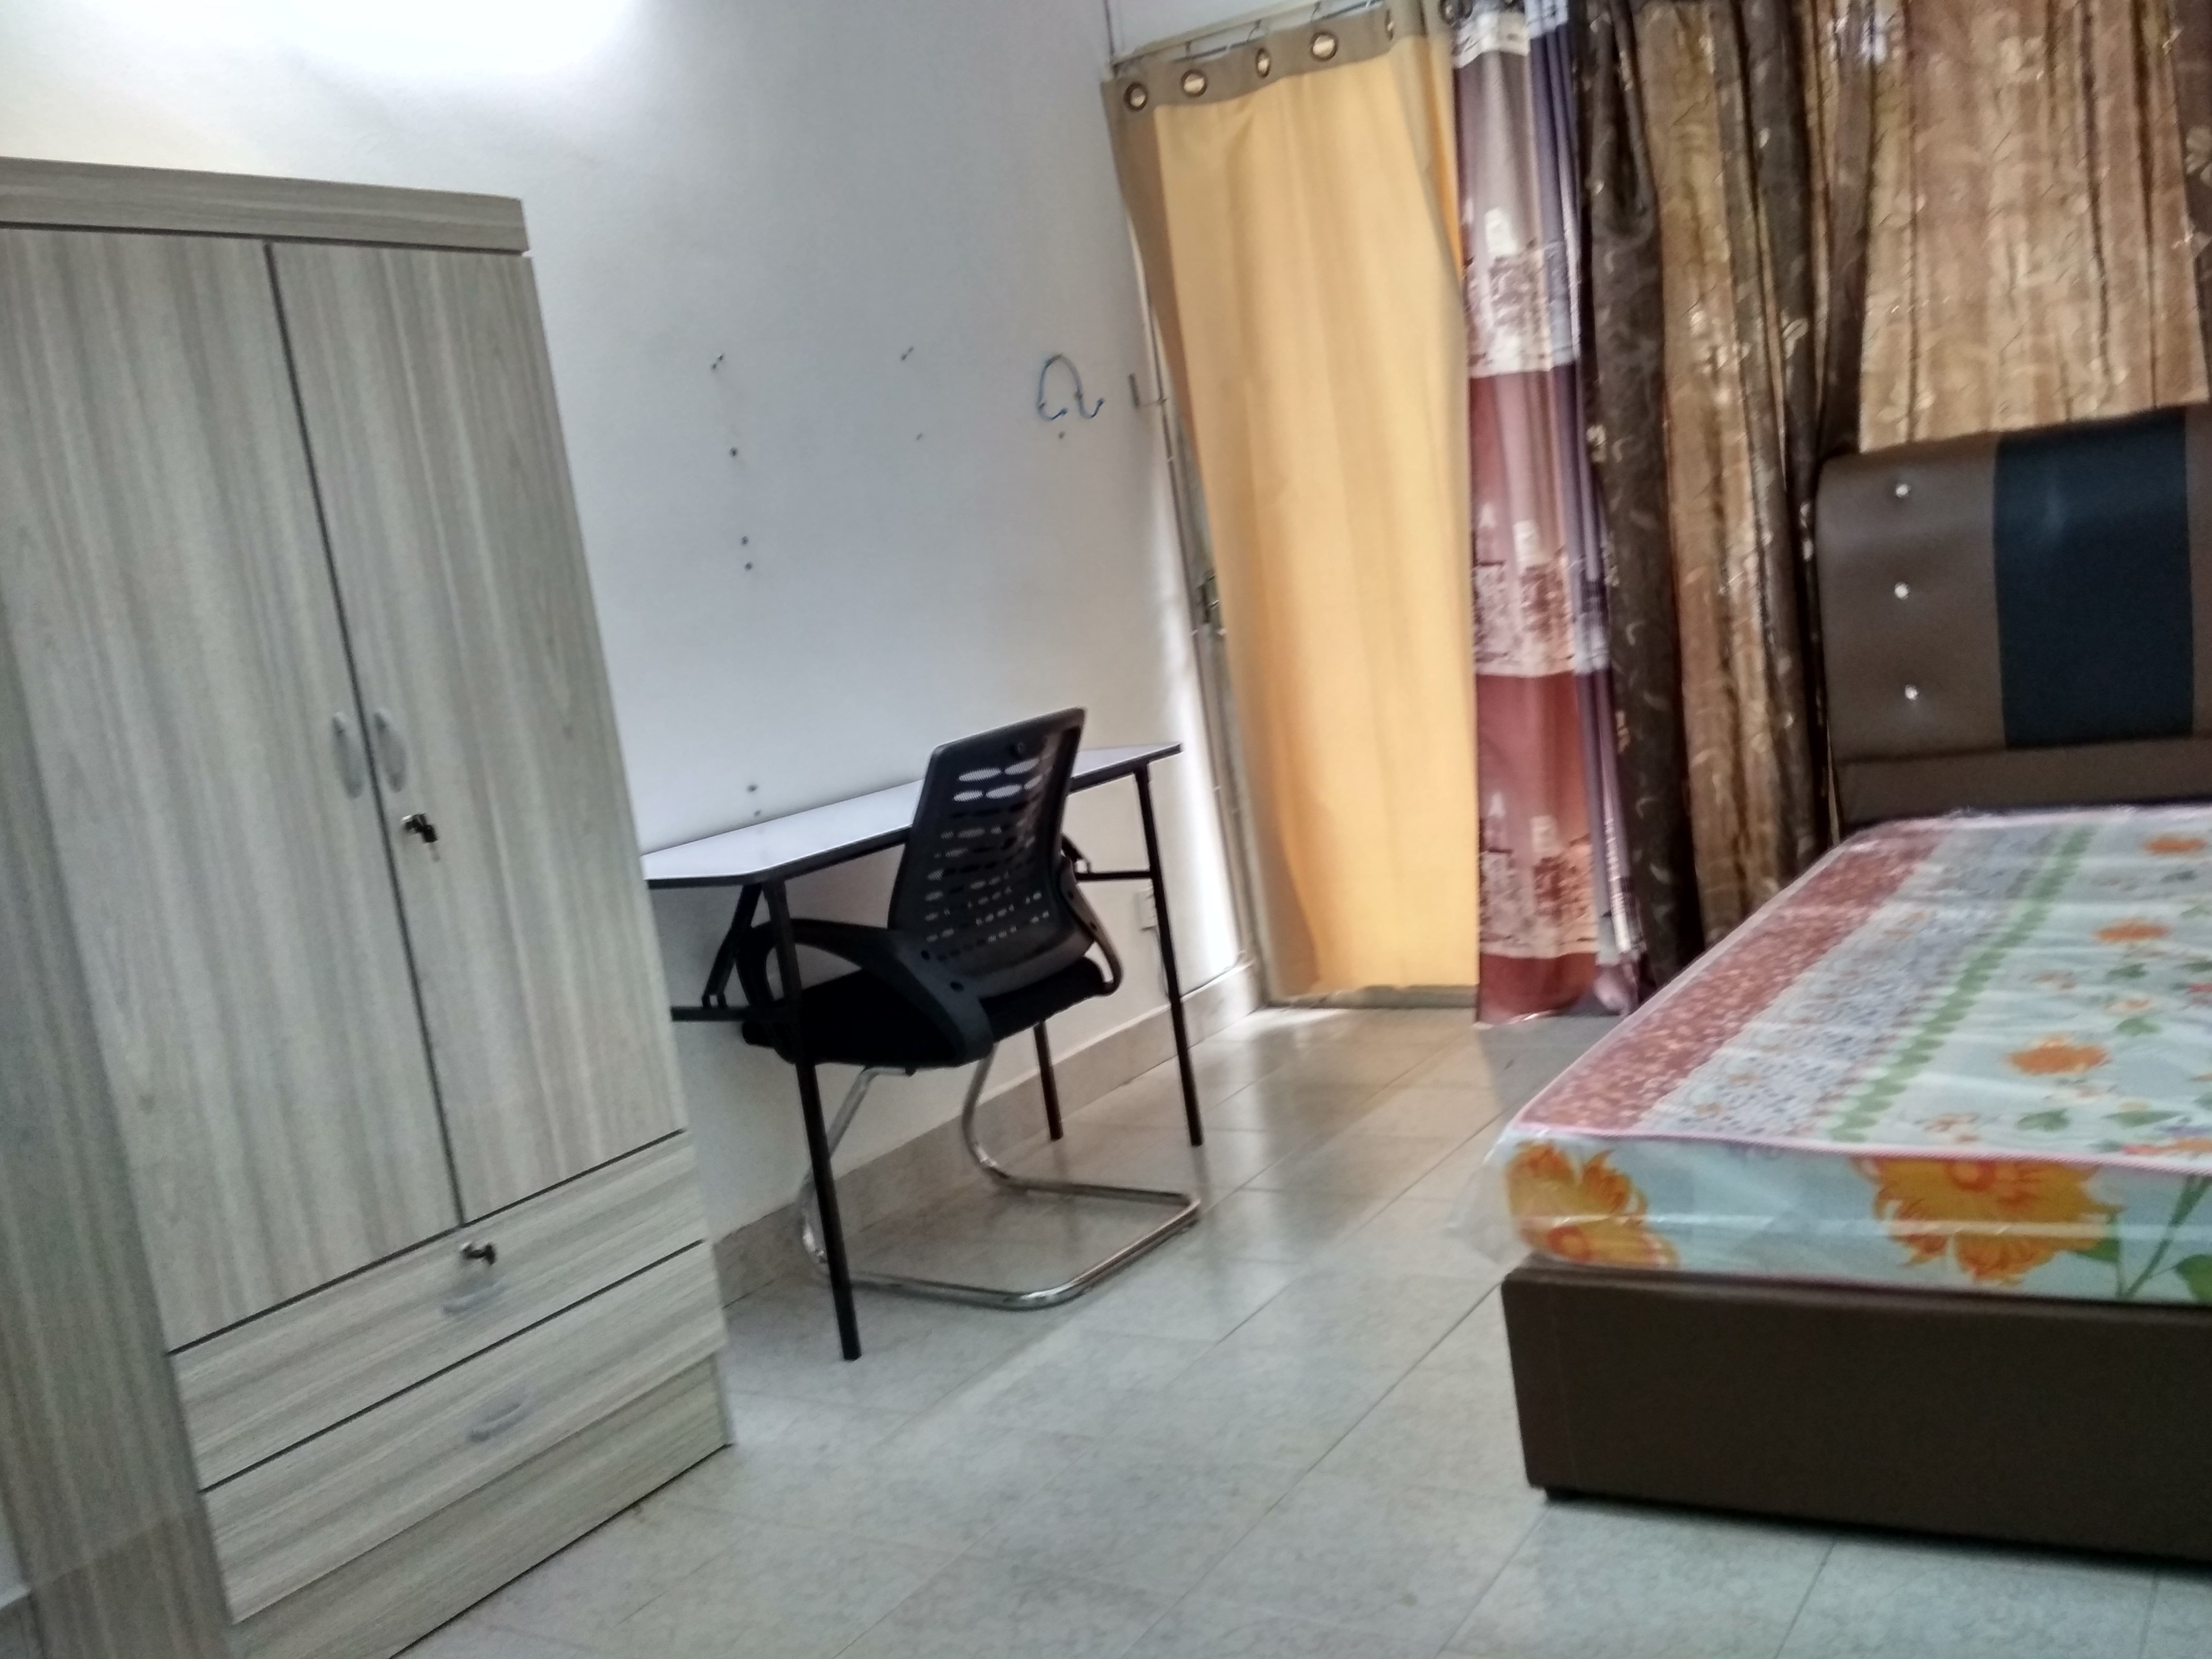 Selangor Room Studio Apartment And House For Rent